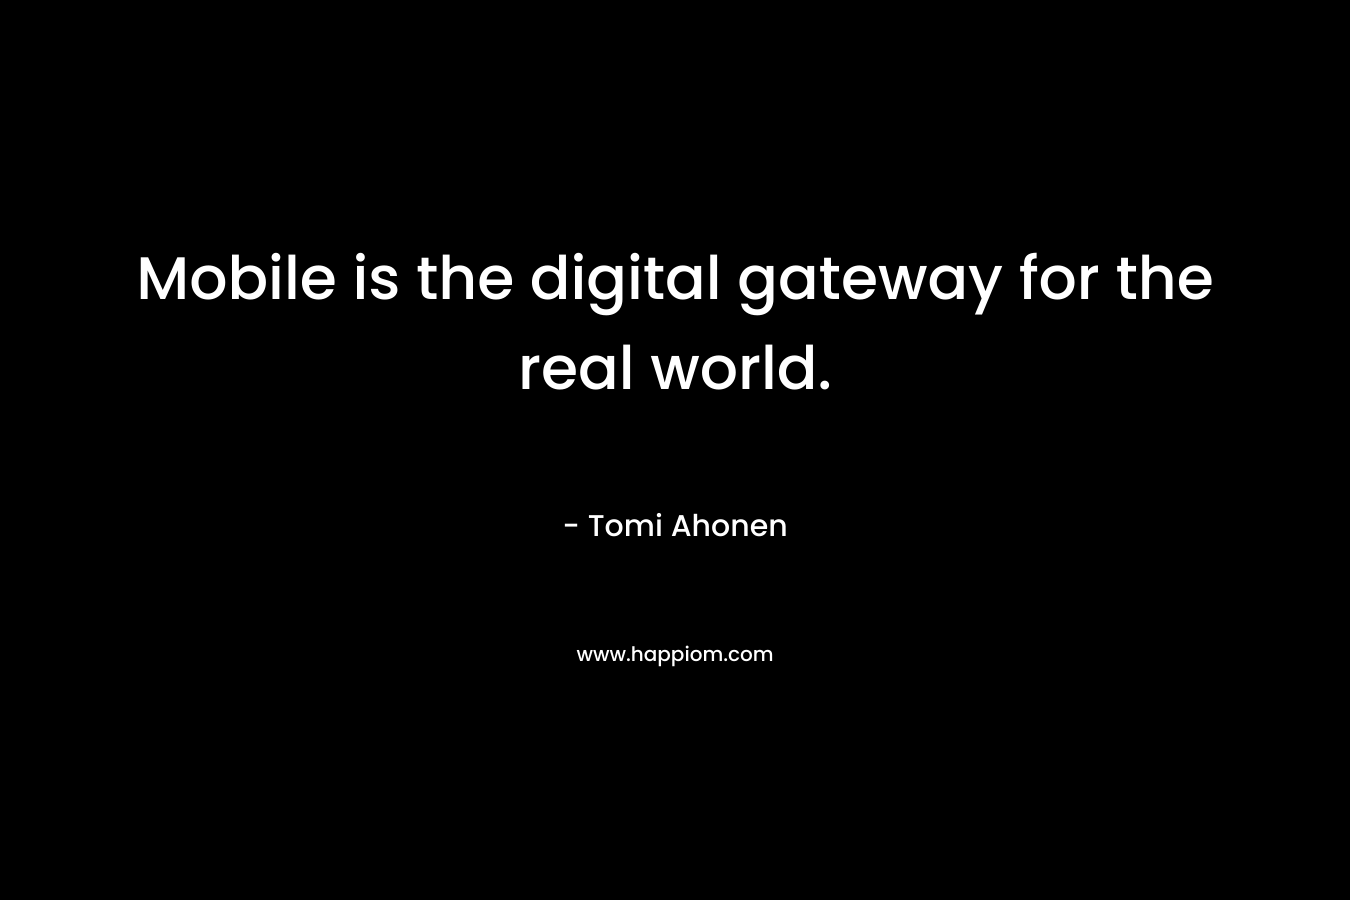 Mobile is the digital gateway for the real world. – Tomi Ahonen